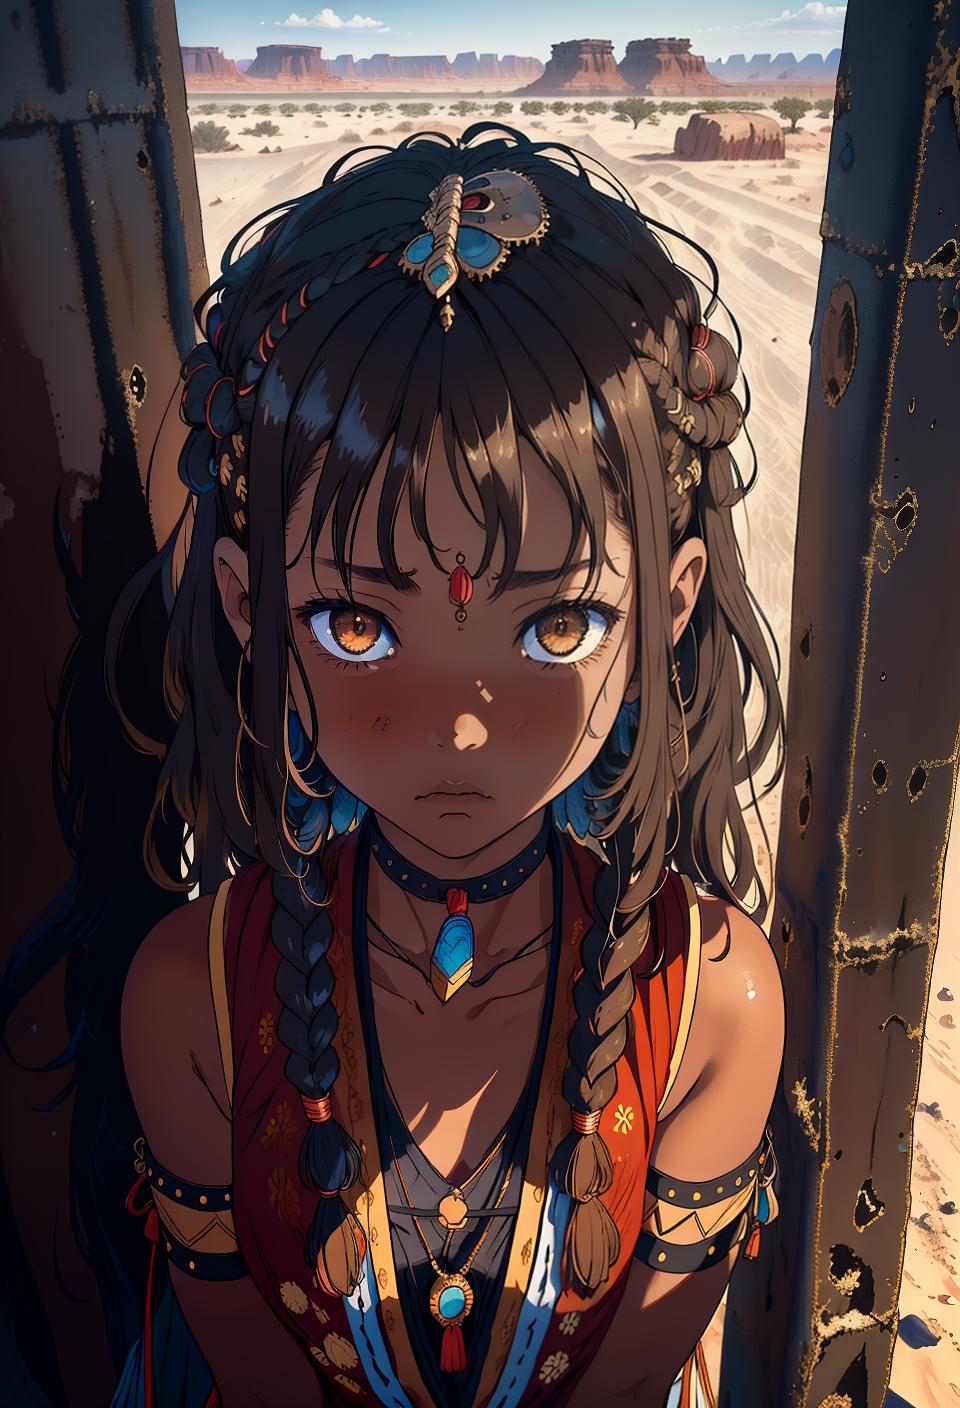  ((trending, highres, masterpiece, cinematic shot)), 1girl, young, female tribal clothes, desert scene, long wavy light brown hair, shaved head, large amber eyes, antisocial, loner personality, scared expression, very dark skin, epic, observant